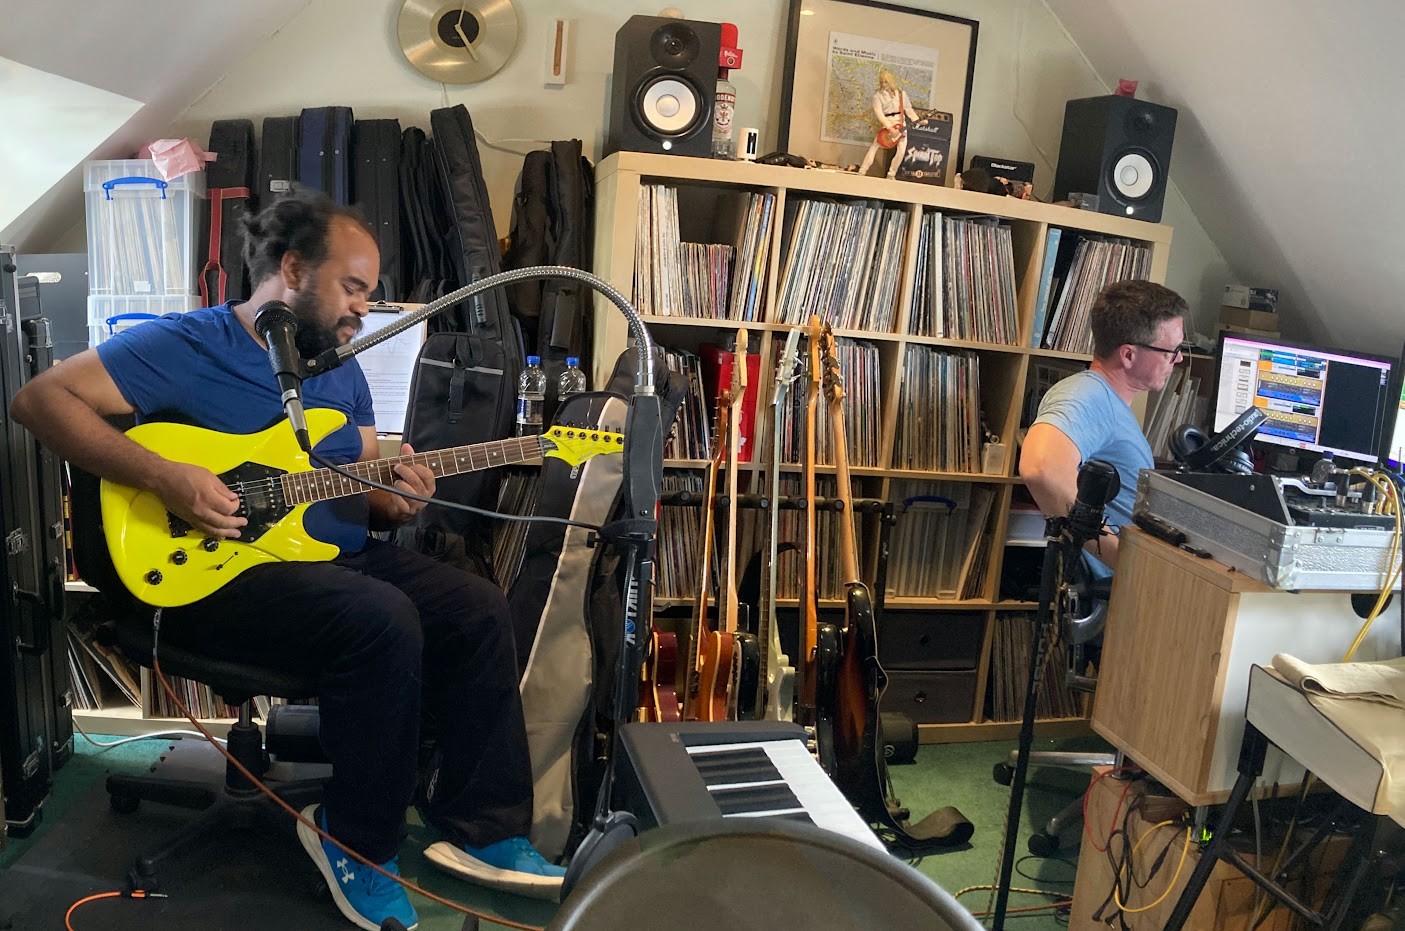 Dean and Chris in the studio